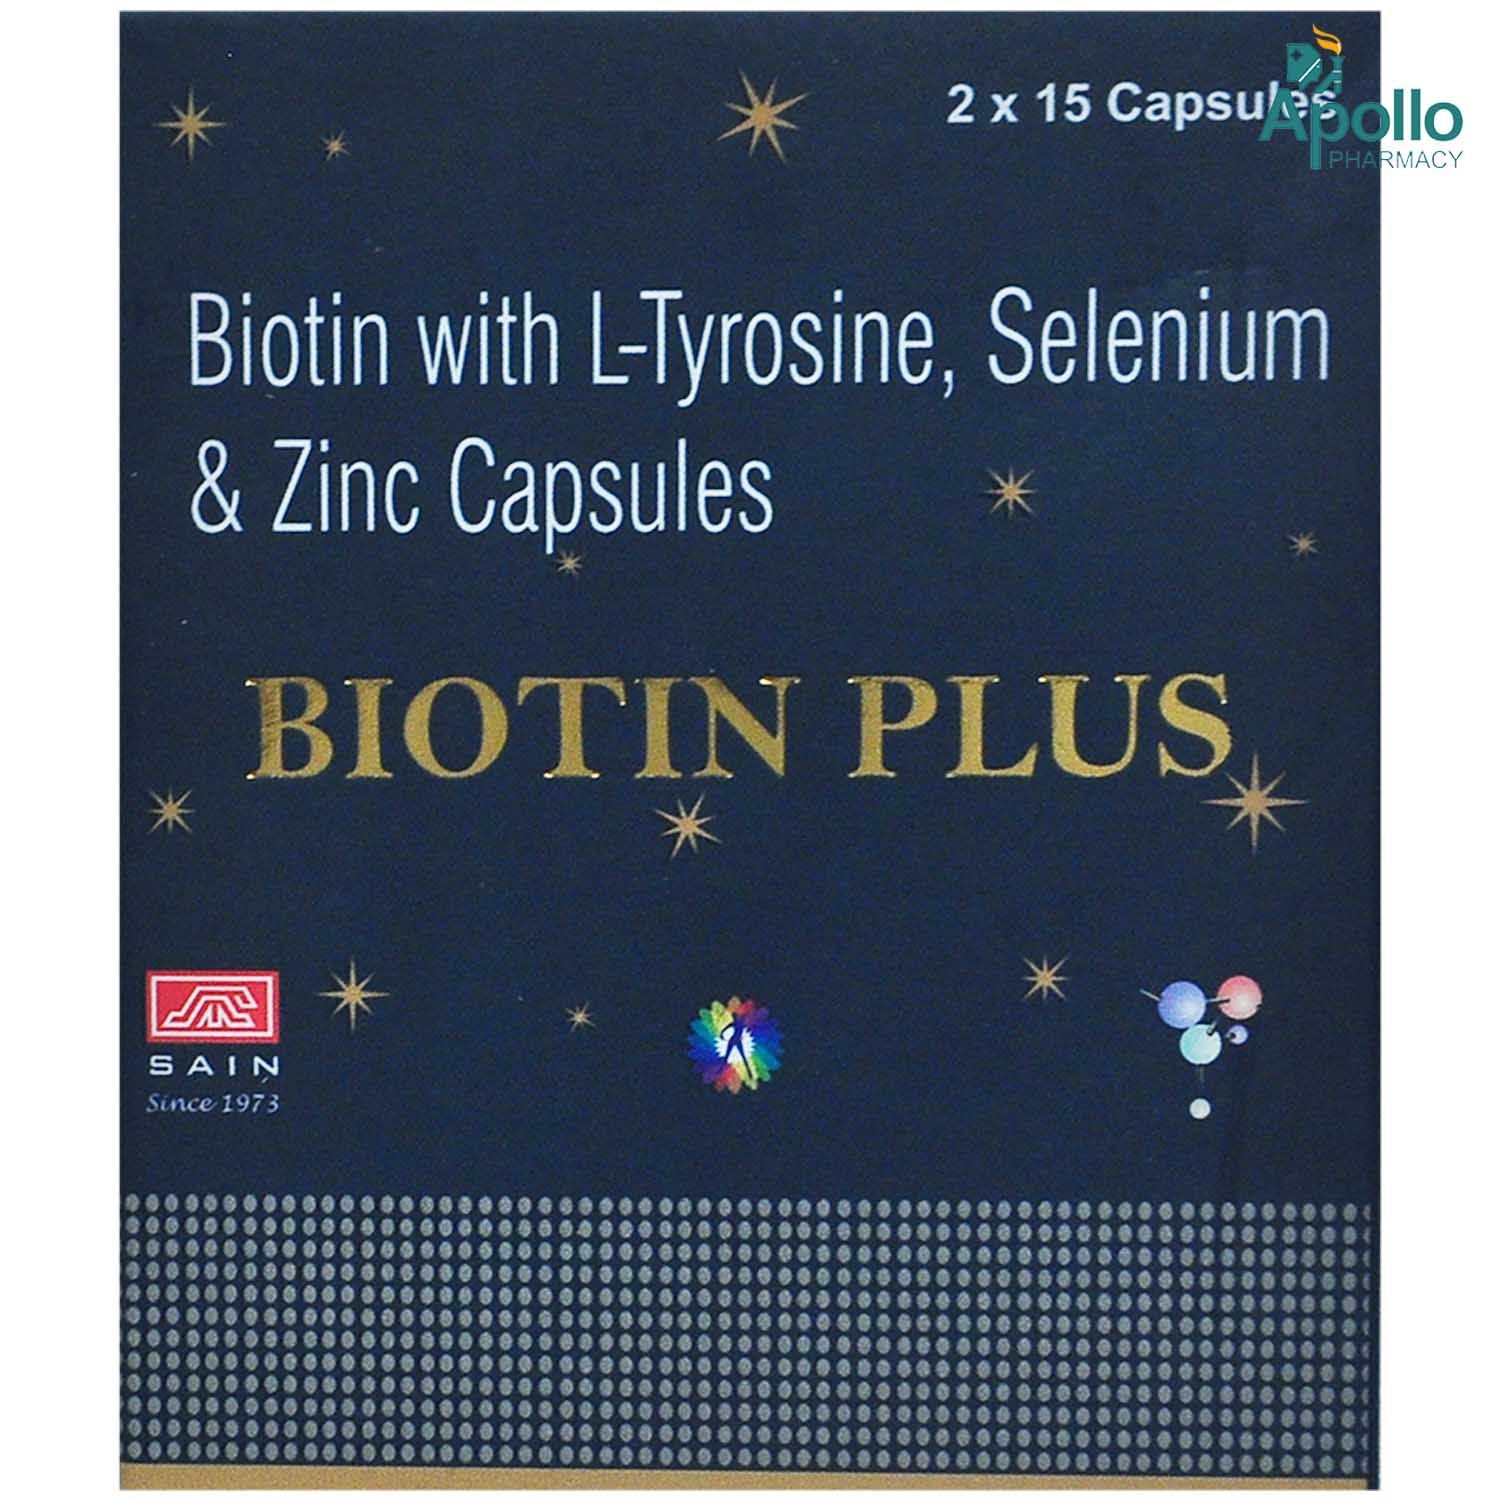 Biotin Plus Tablet 15's Price, Uses, Side Effects, Composition - Apollo  Pharmacy